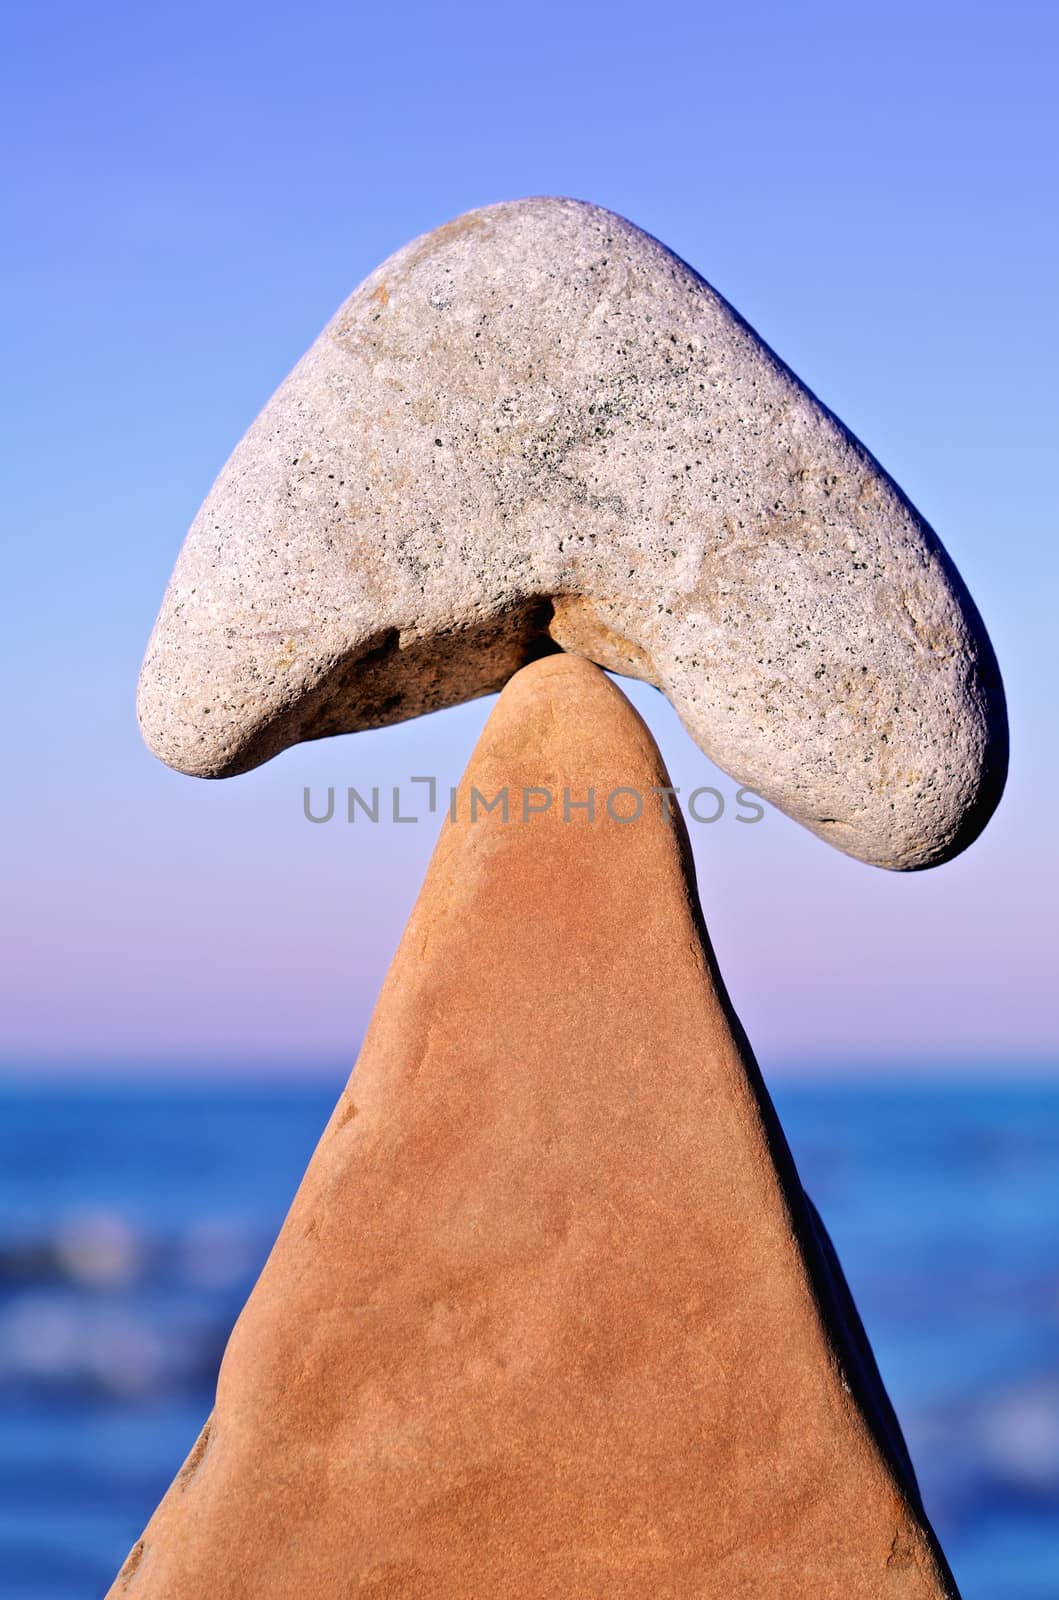 Balancing of pebbles on the top of triangle stone